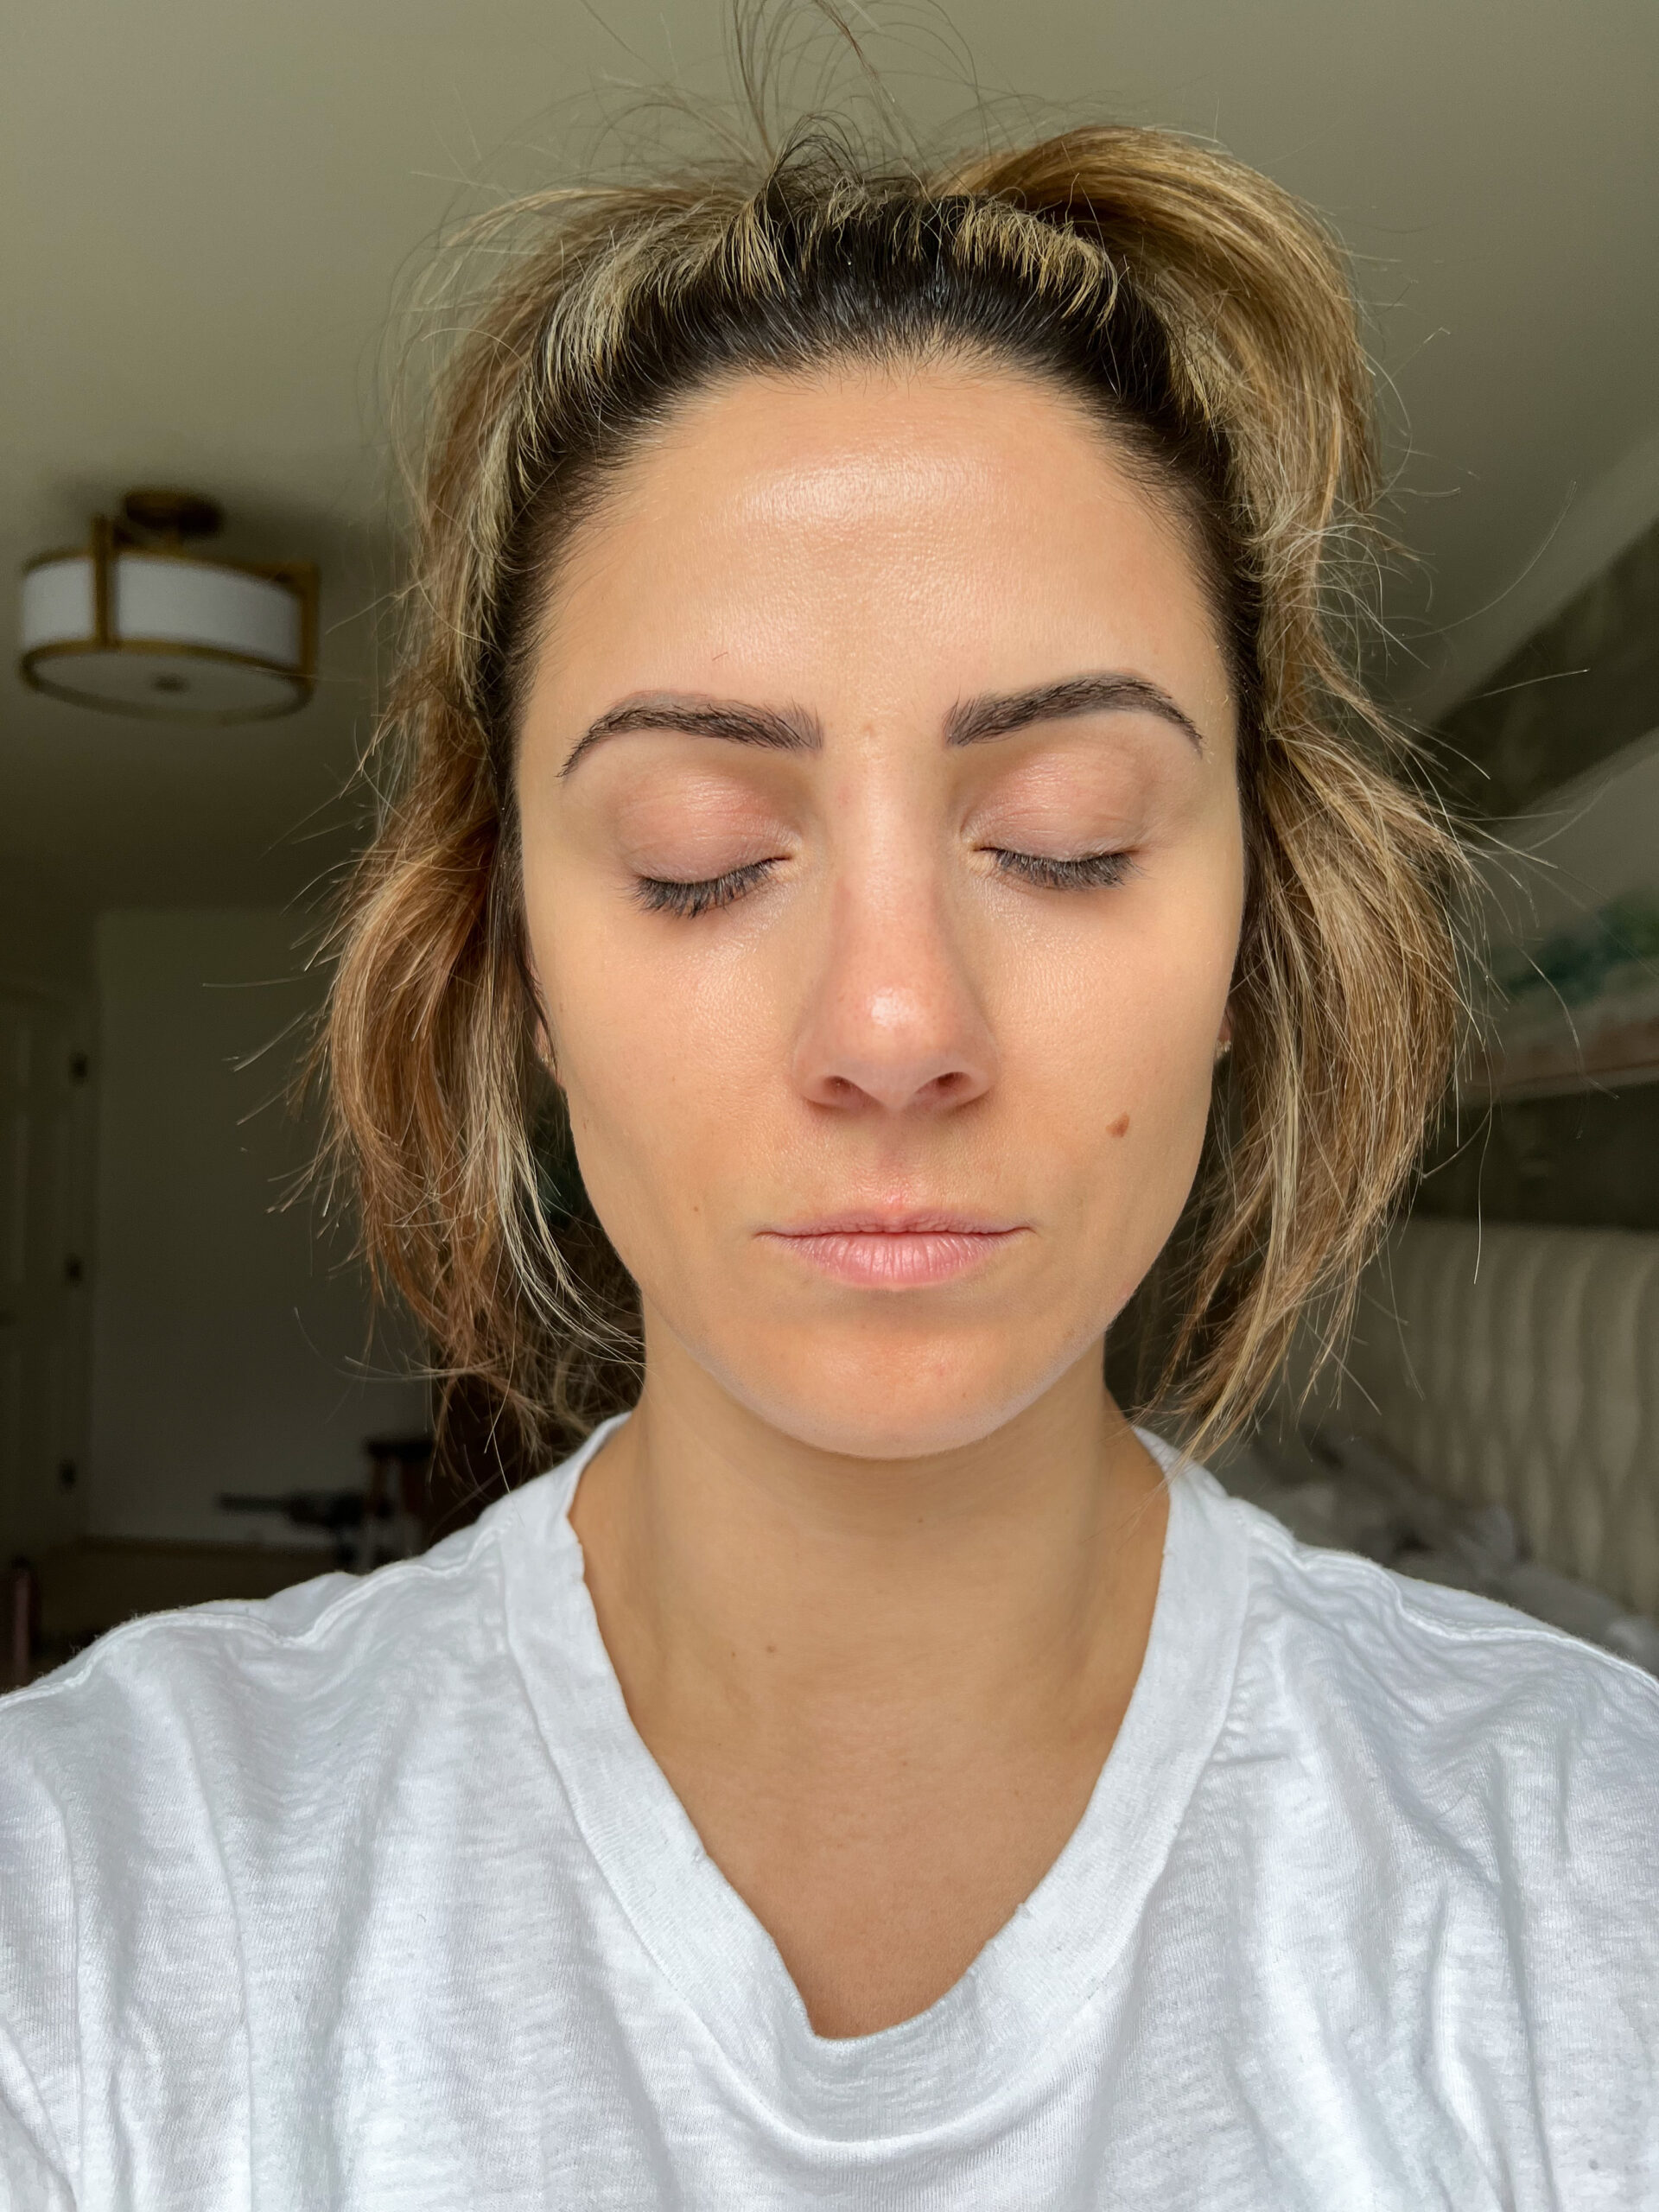 Life and style blogger Lauren McBride shares her latest skincare routine and coupon code for Barefaced Skincare.